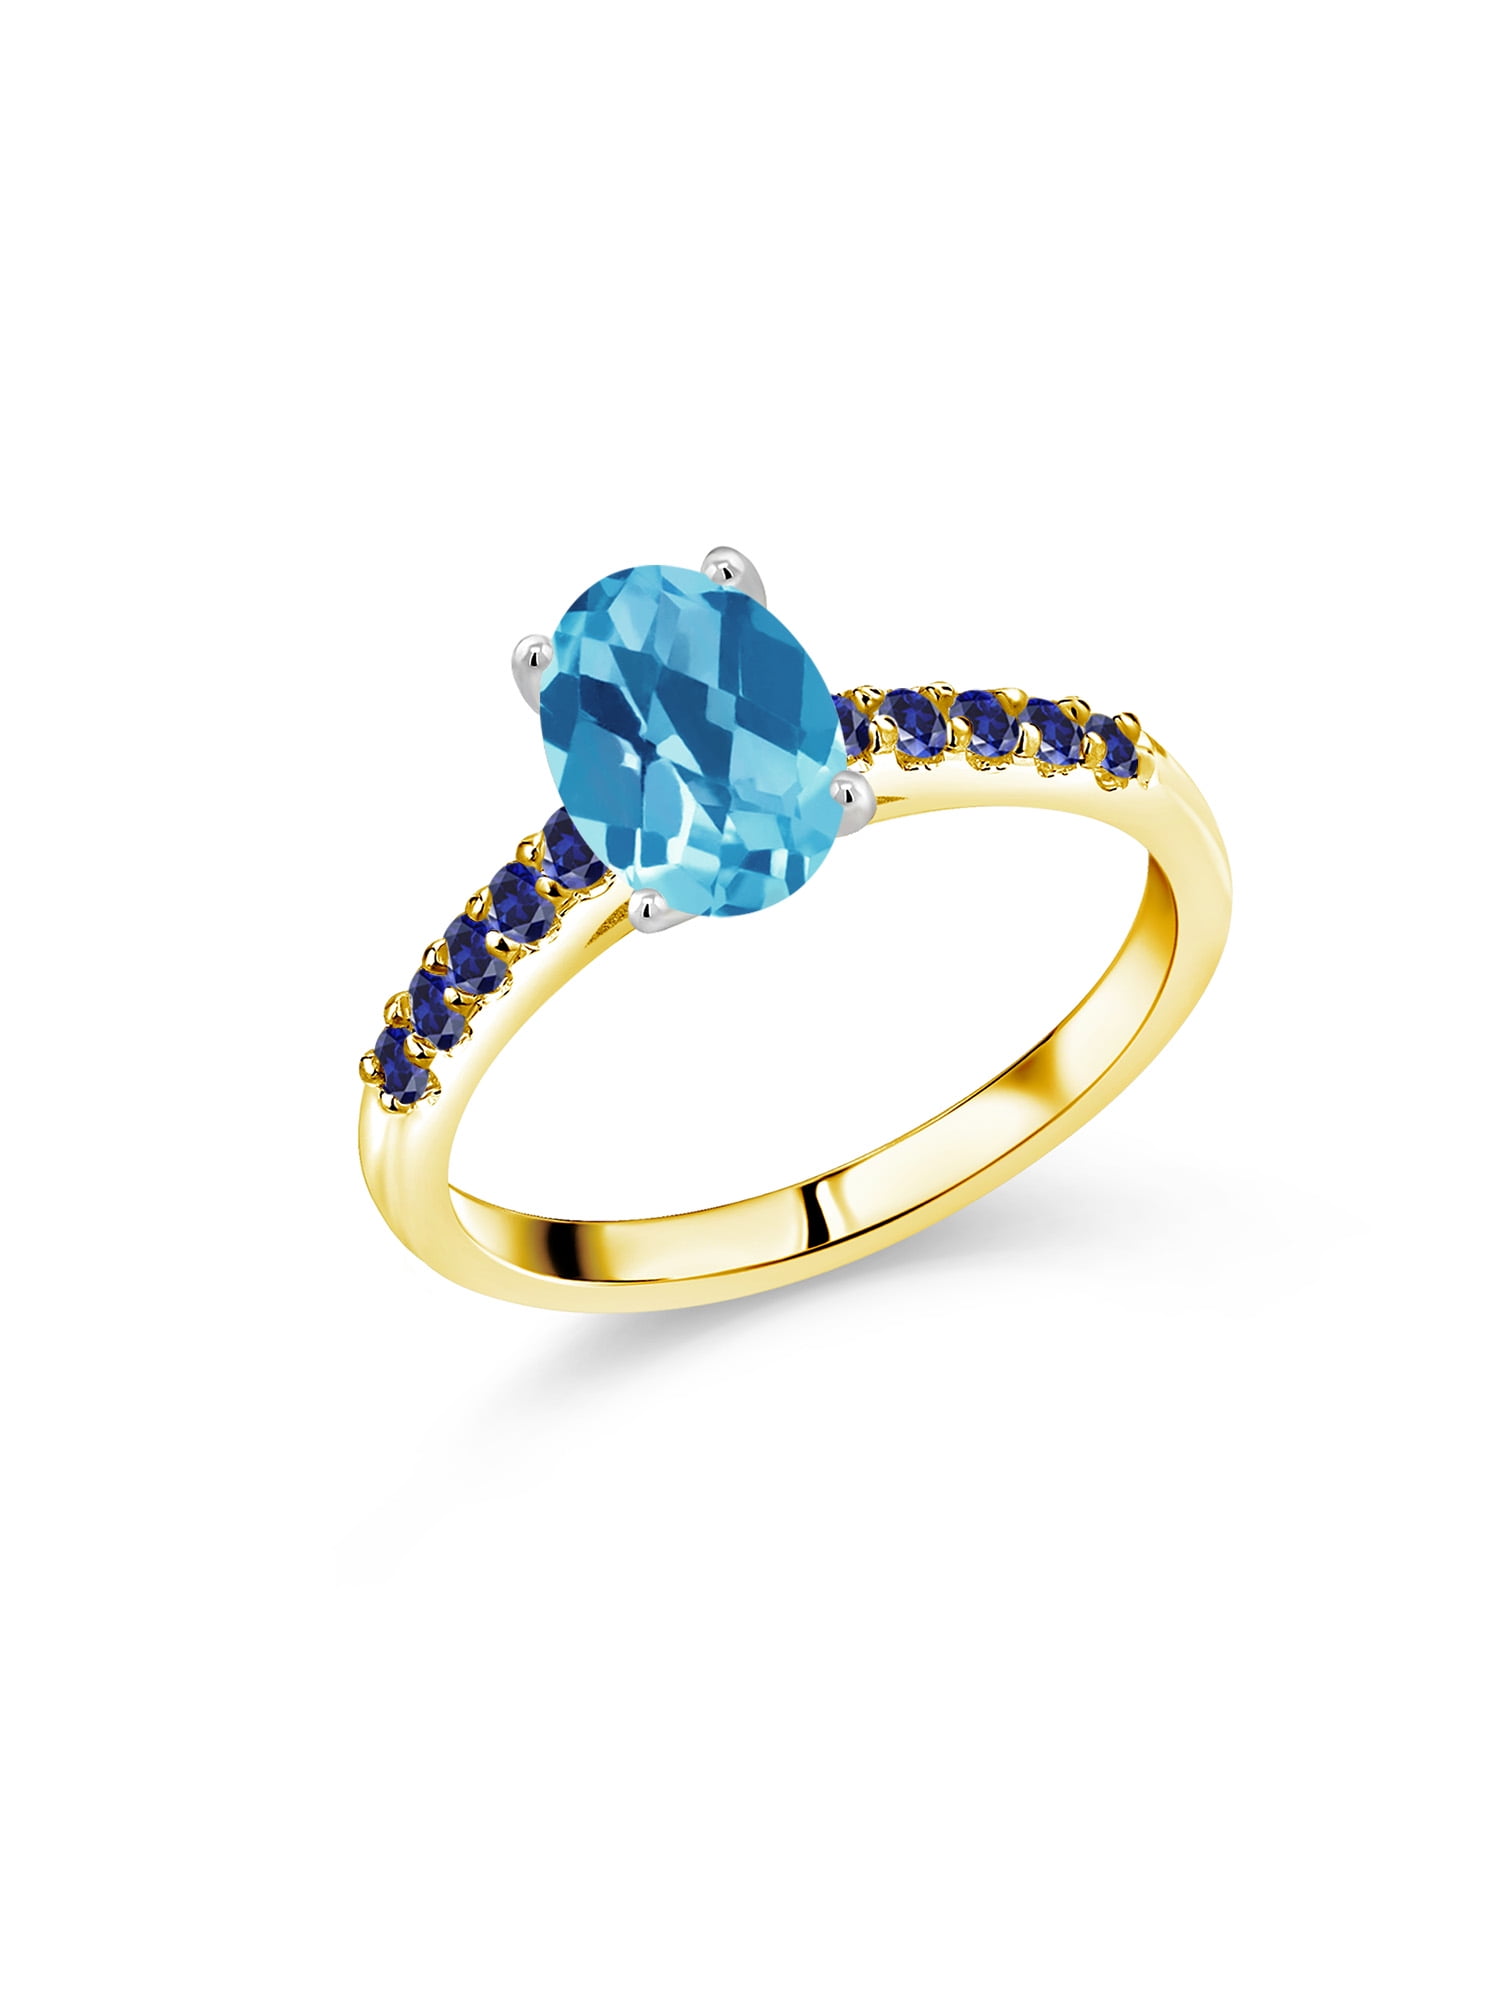 sizes 5 to 10 14K White Gold Natural Swiss Blue Topaz Ring Oval 9x7 mm Yellow Sapphire Accent 